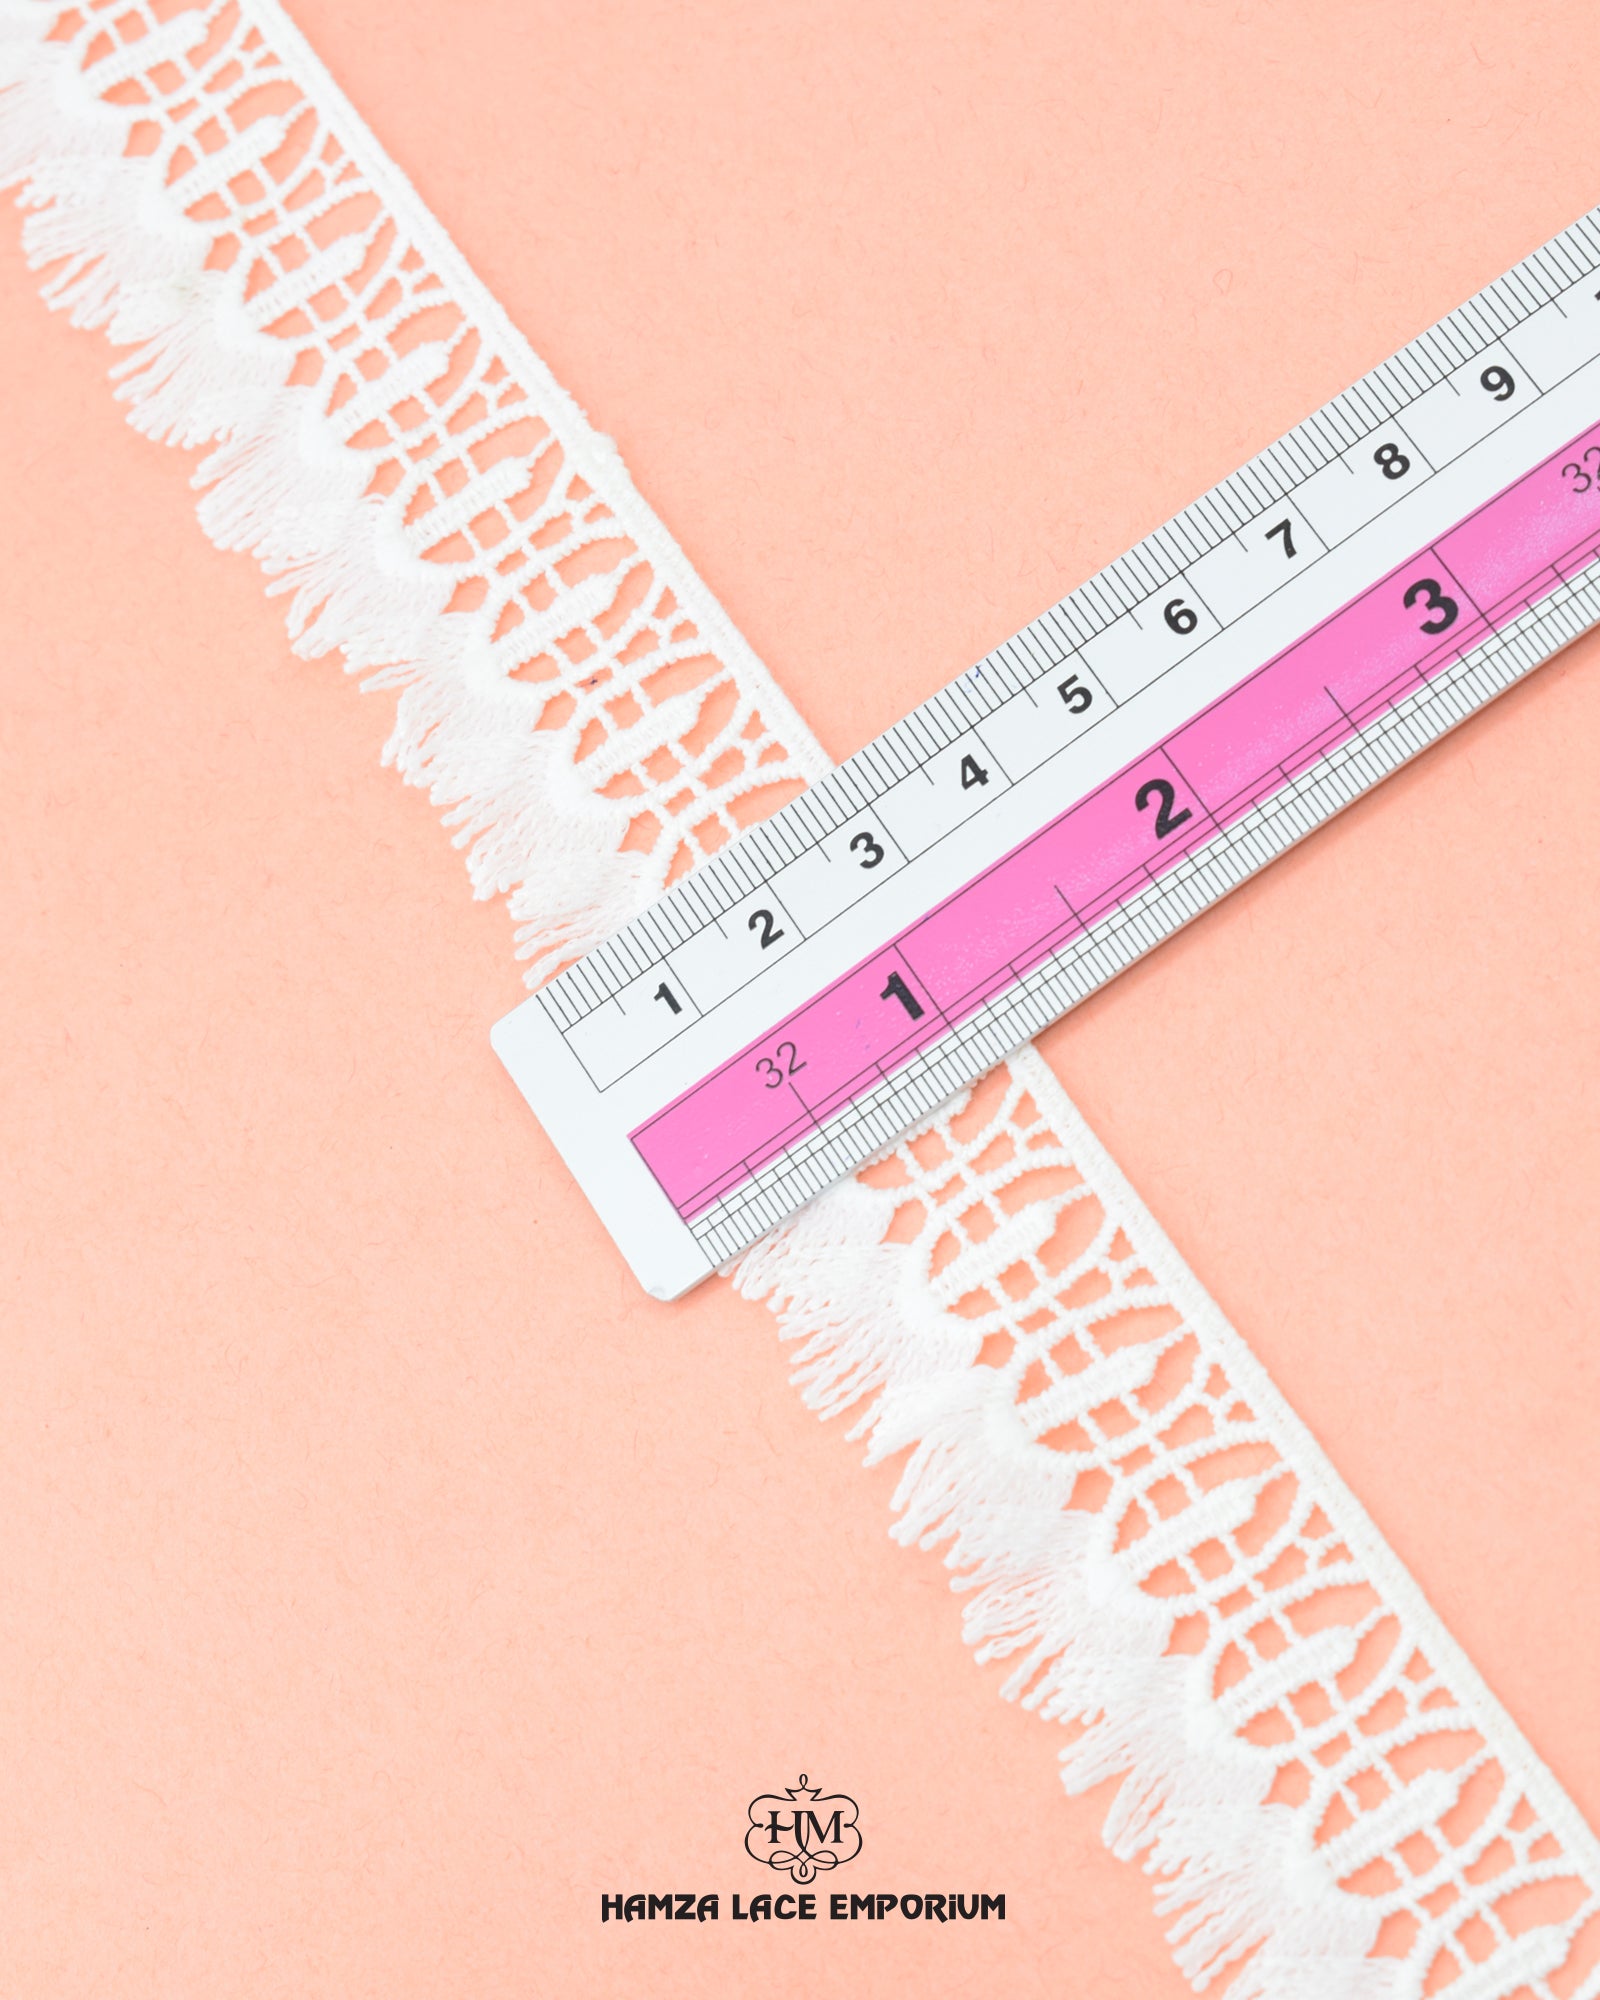 Size of the 'Edging Jhaalar Lace 23344' is shown as '1.25' inches with the help of a ruler